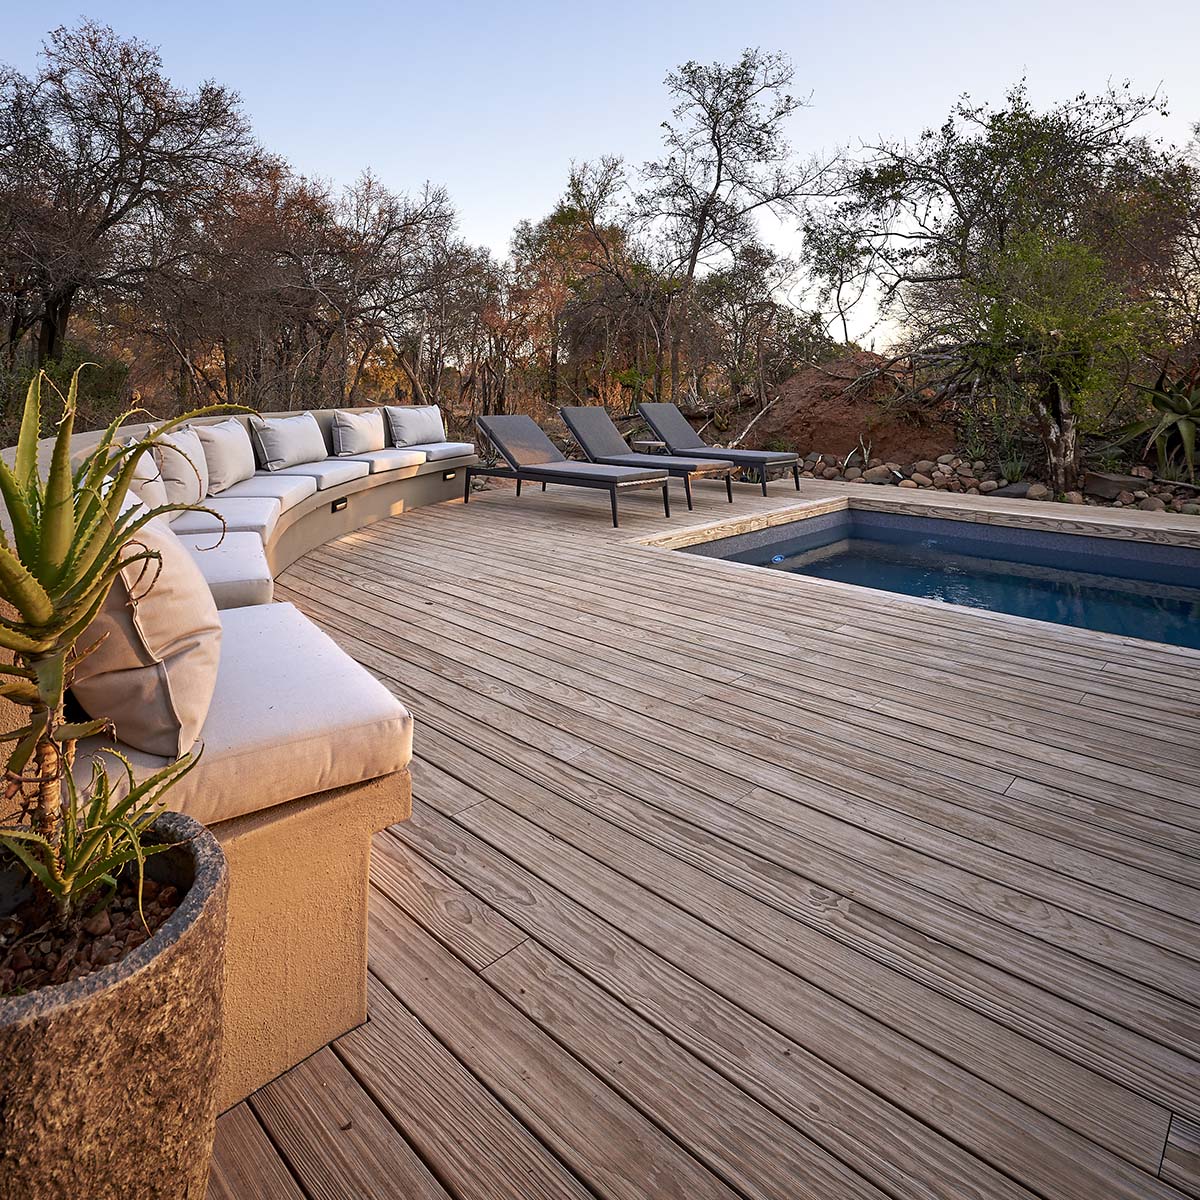 Rhino Wood Exterior Deck with Pool